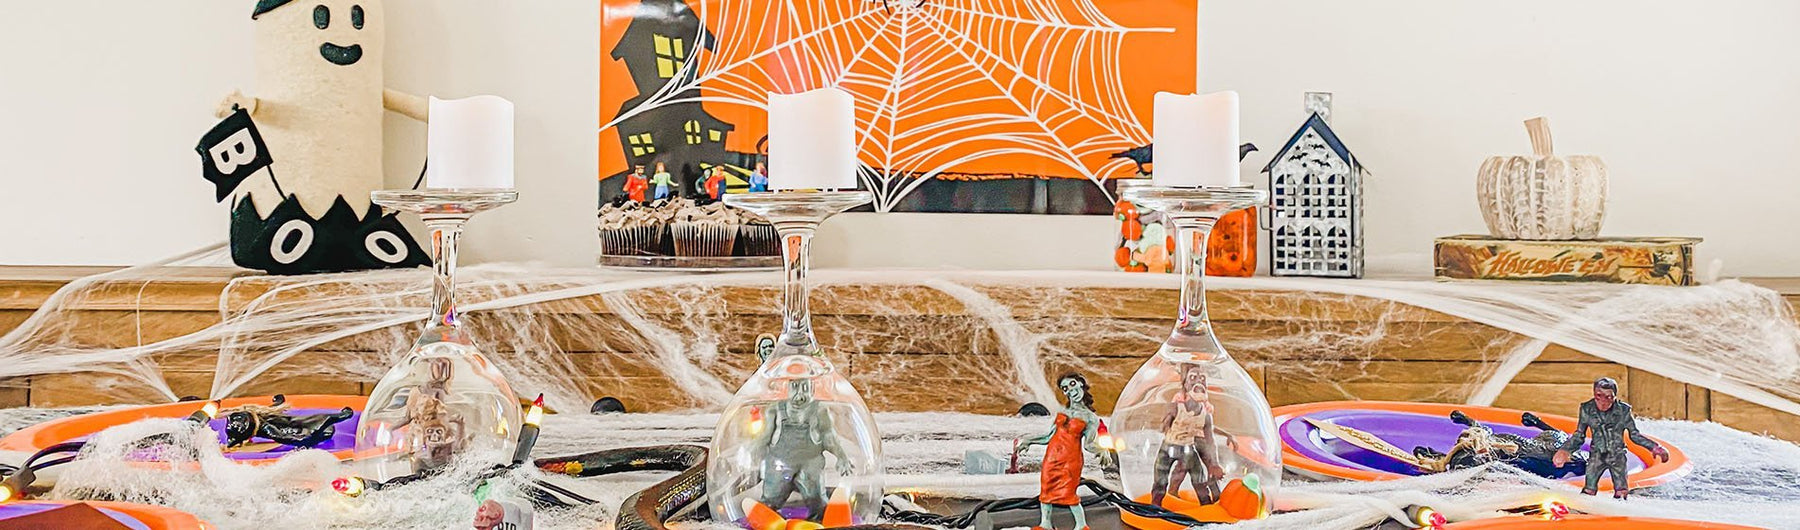 How To DIY an at-home Halloween Party with figurines - Safari Ltd®